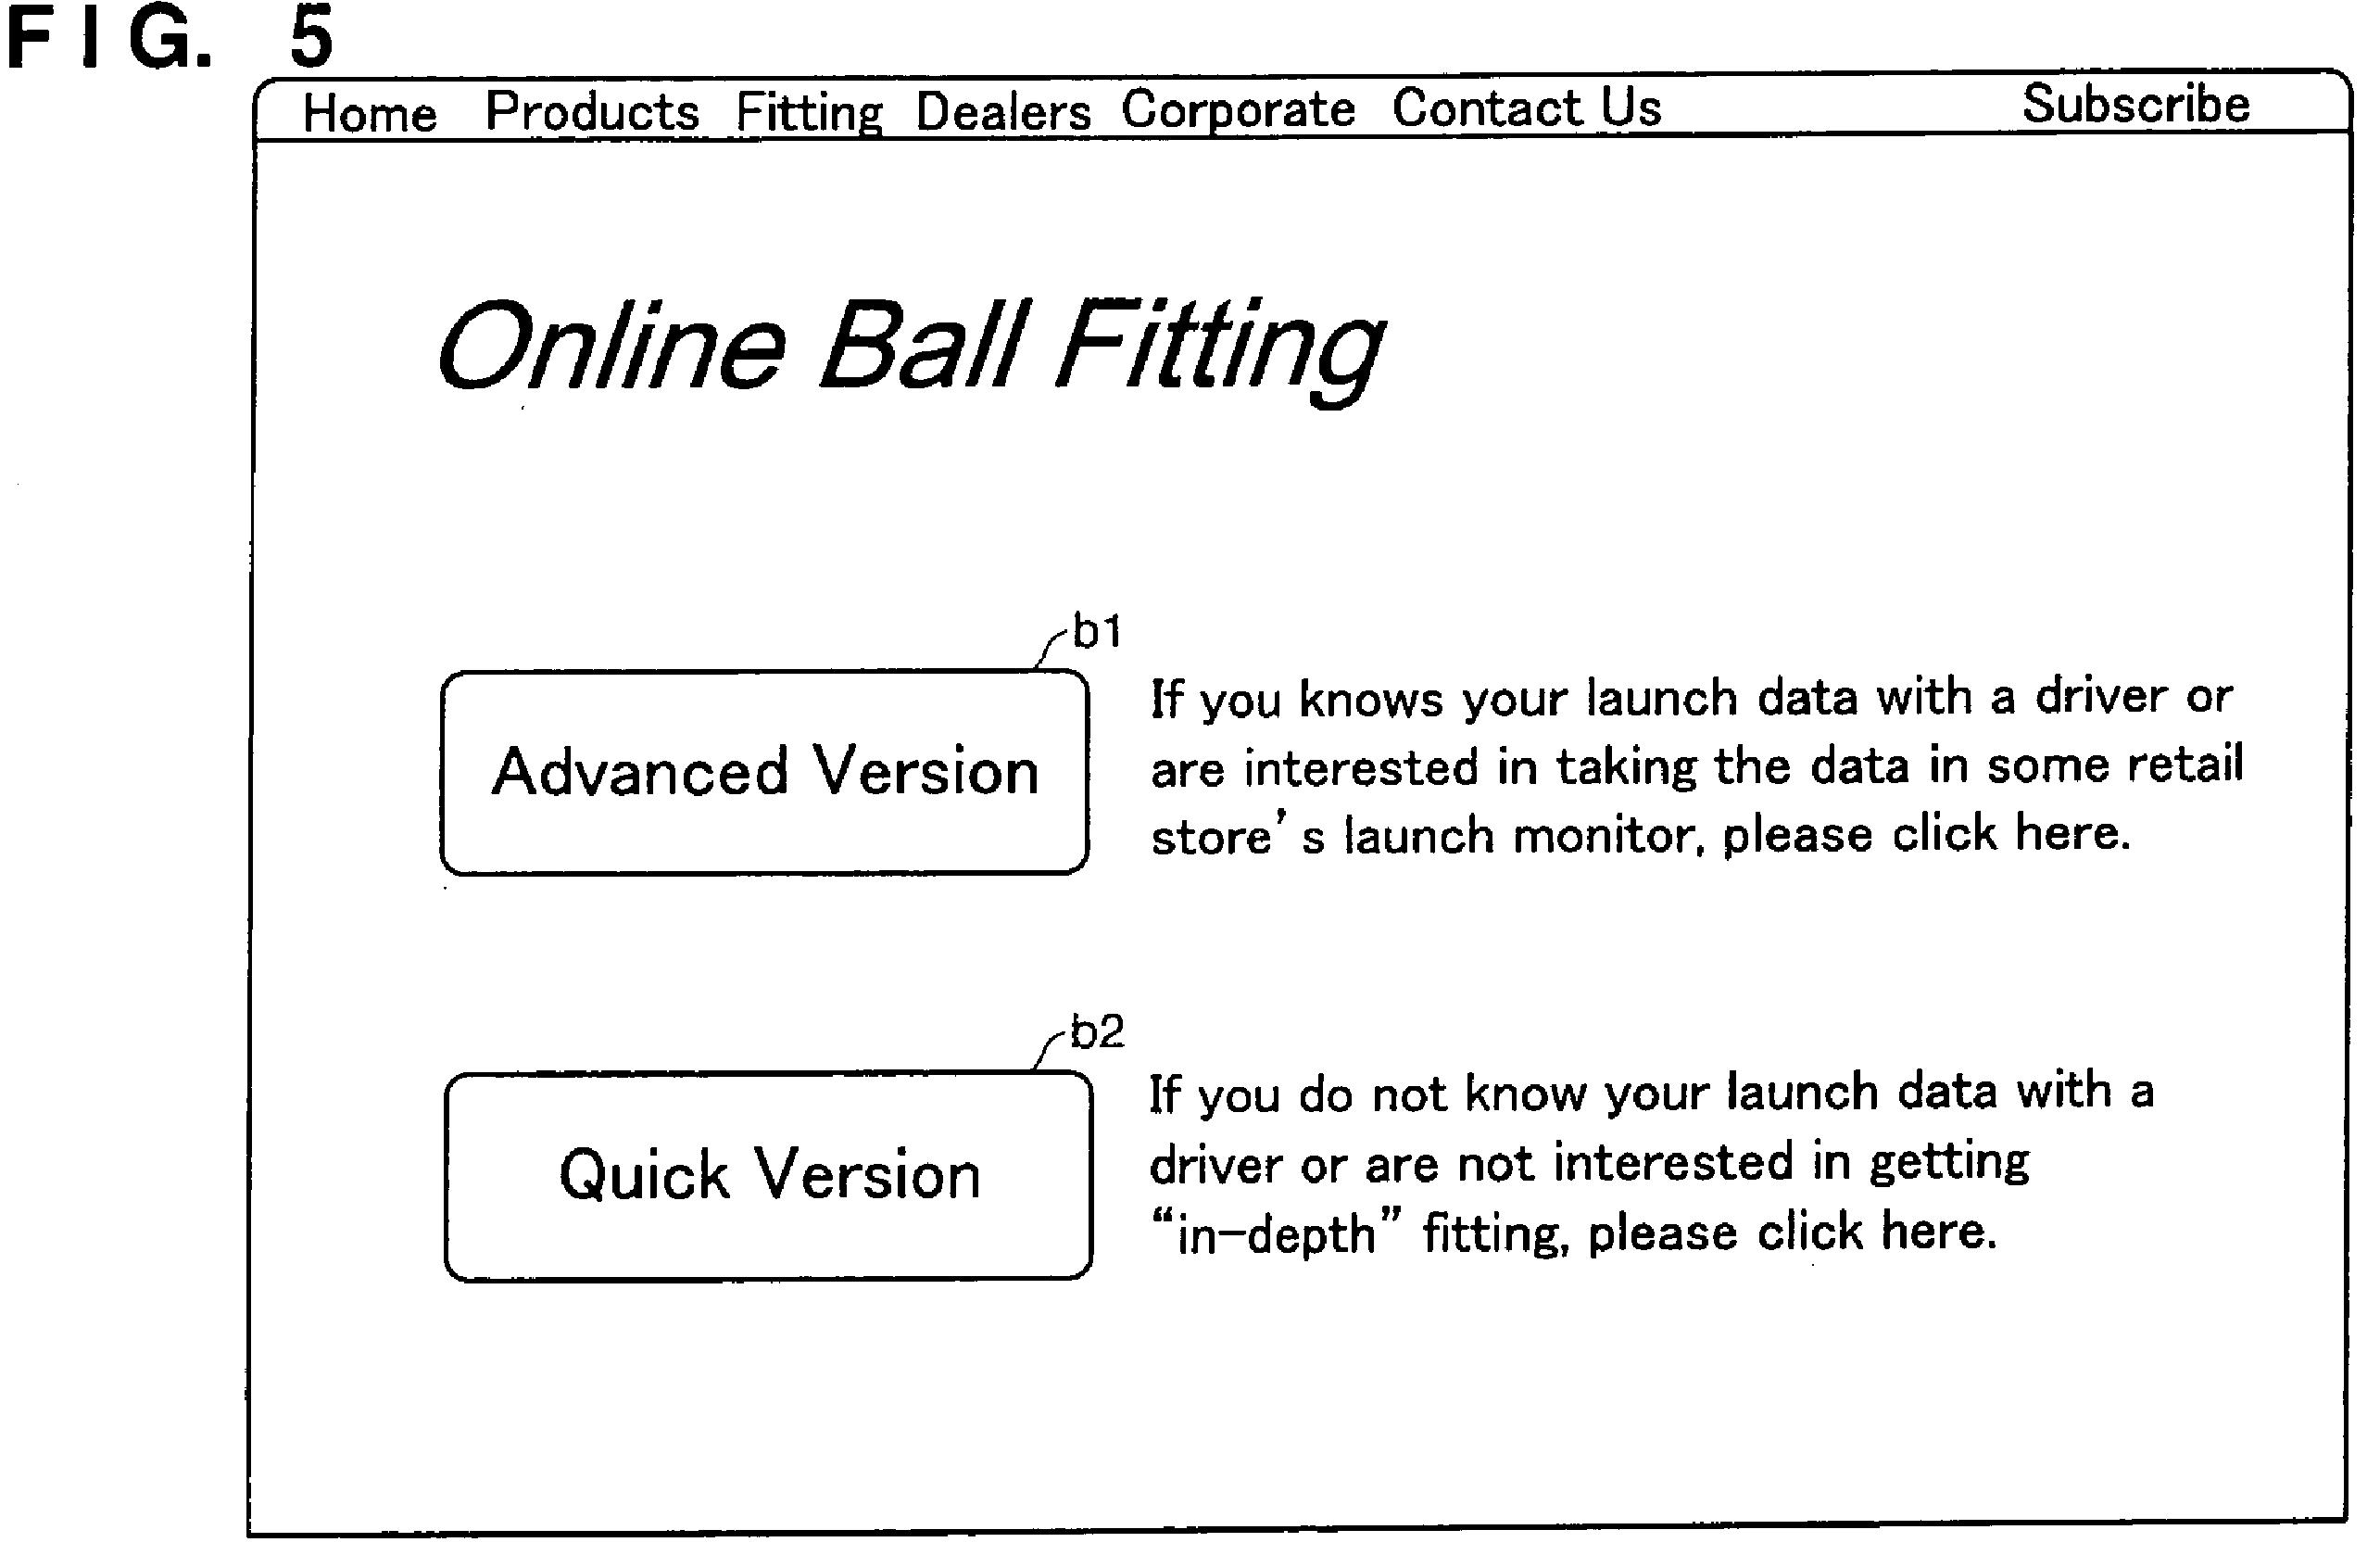 A Bridgestone Golf Ball Fitting Patent Application Publishes! Should Contain All Sorts of Cool Ball Fitting Information, Right? Golf-Patents